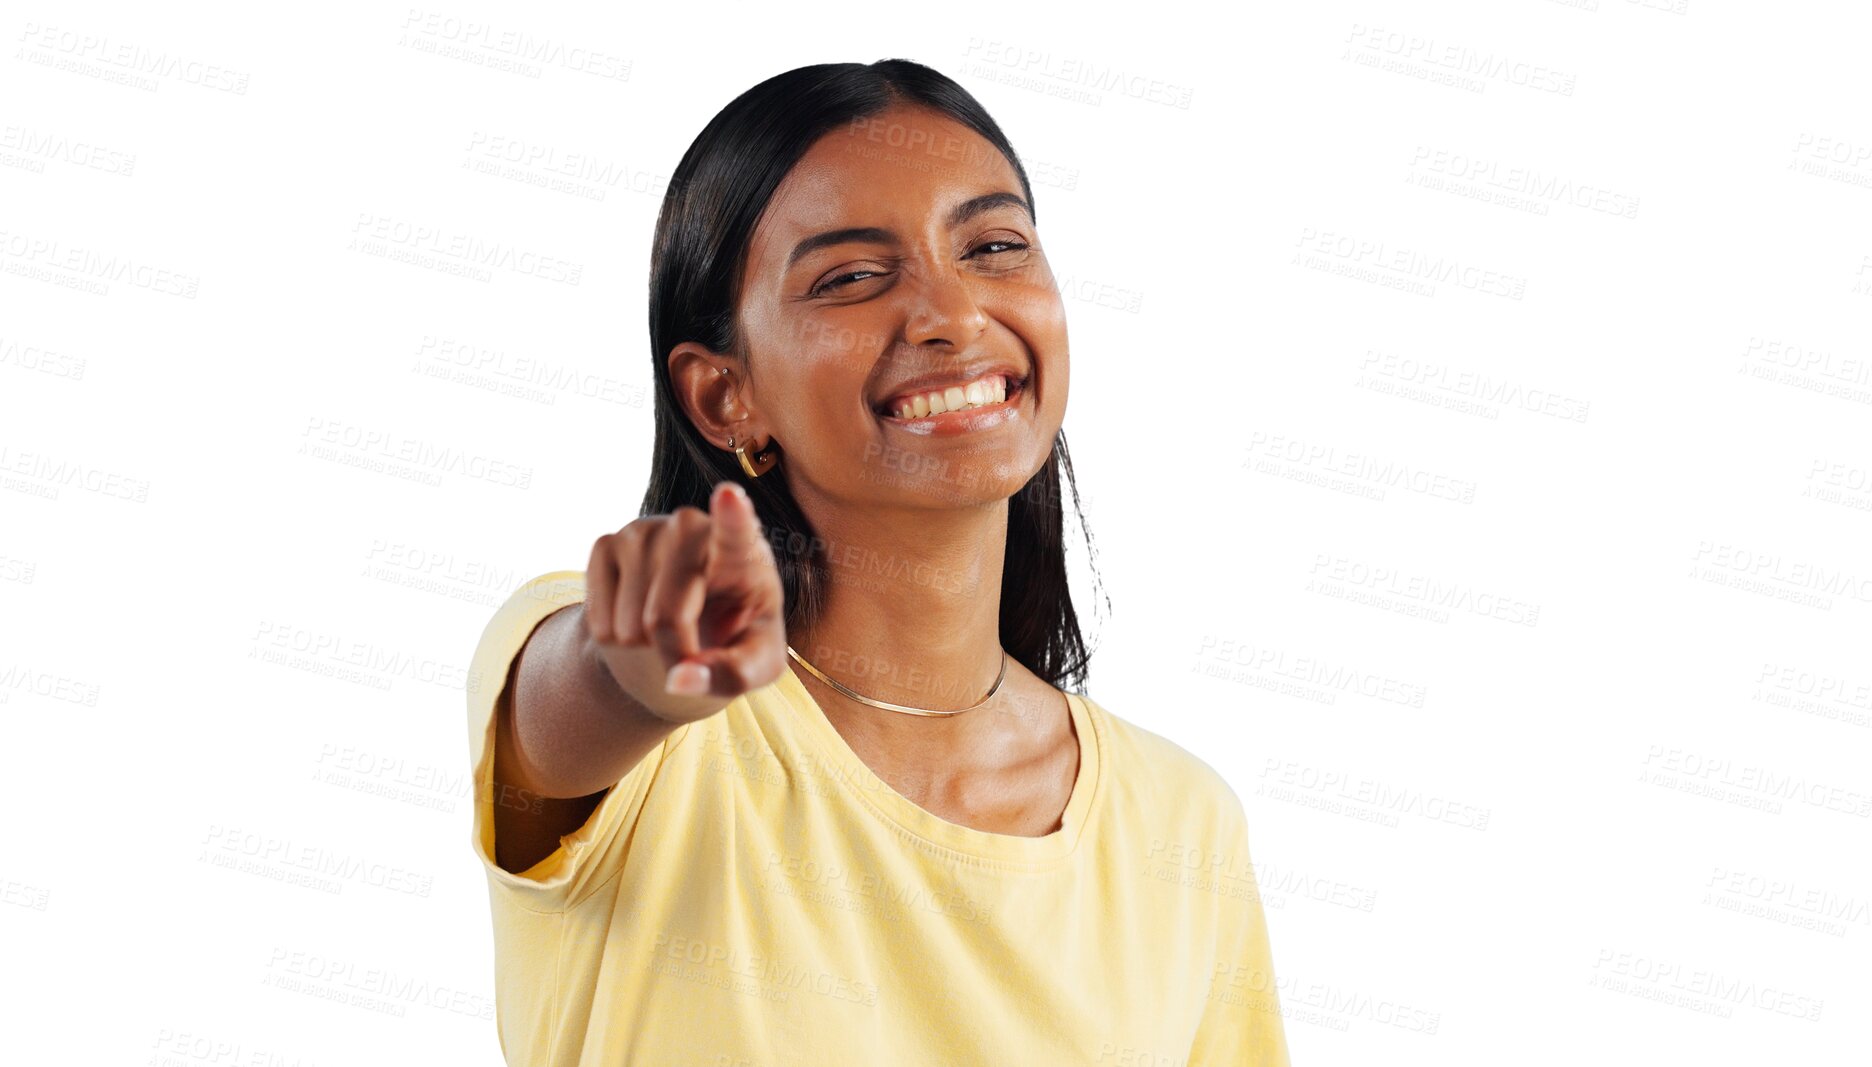 Buy stock photo Portrait, woman and pointing finger for choice, hey you and excited with big smile and happiness. Indian female person to show, decision and invitation while isolated on transparent png background